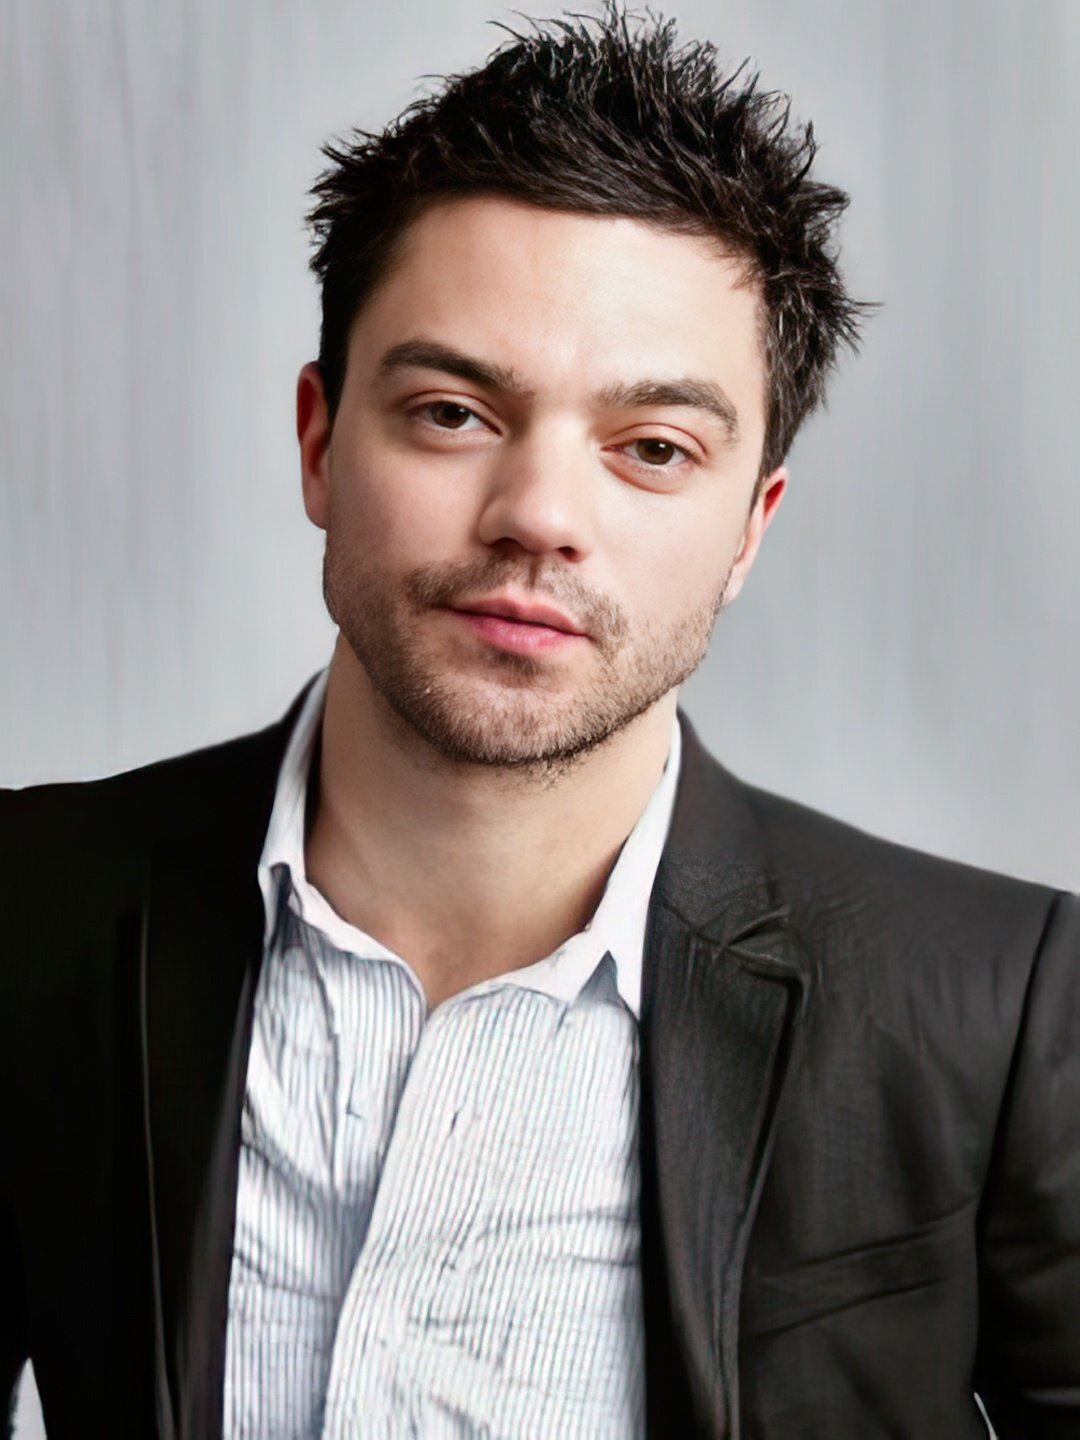 Dominic Cooper personal traits